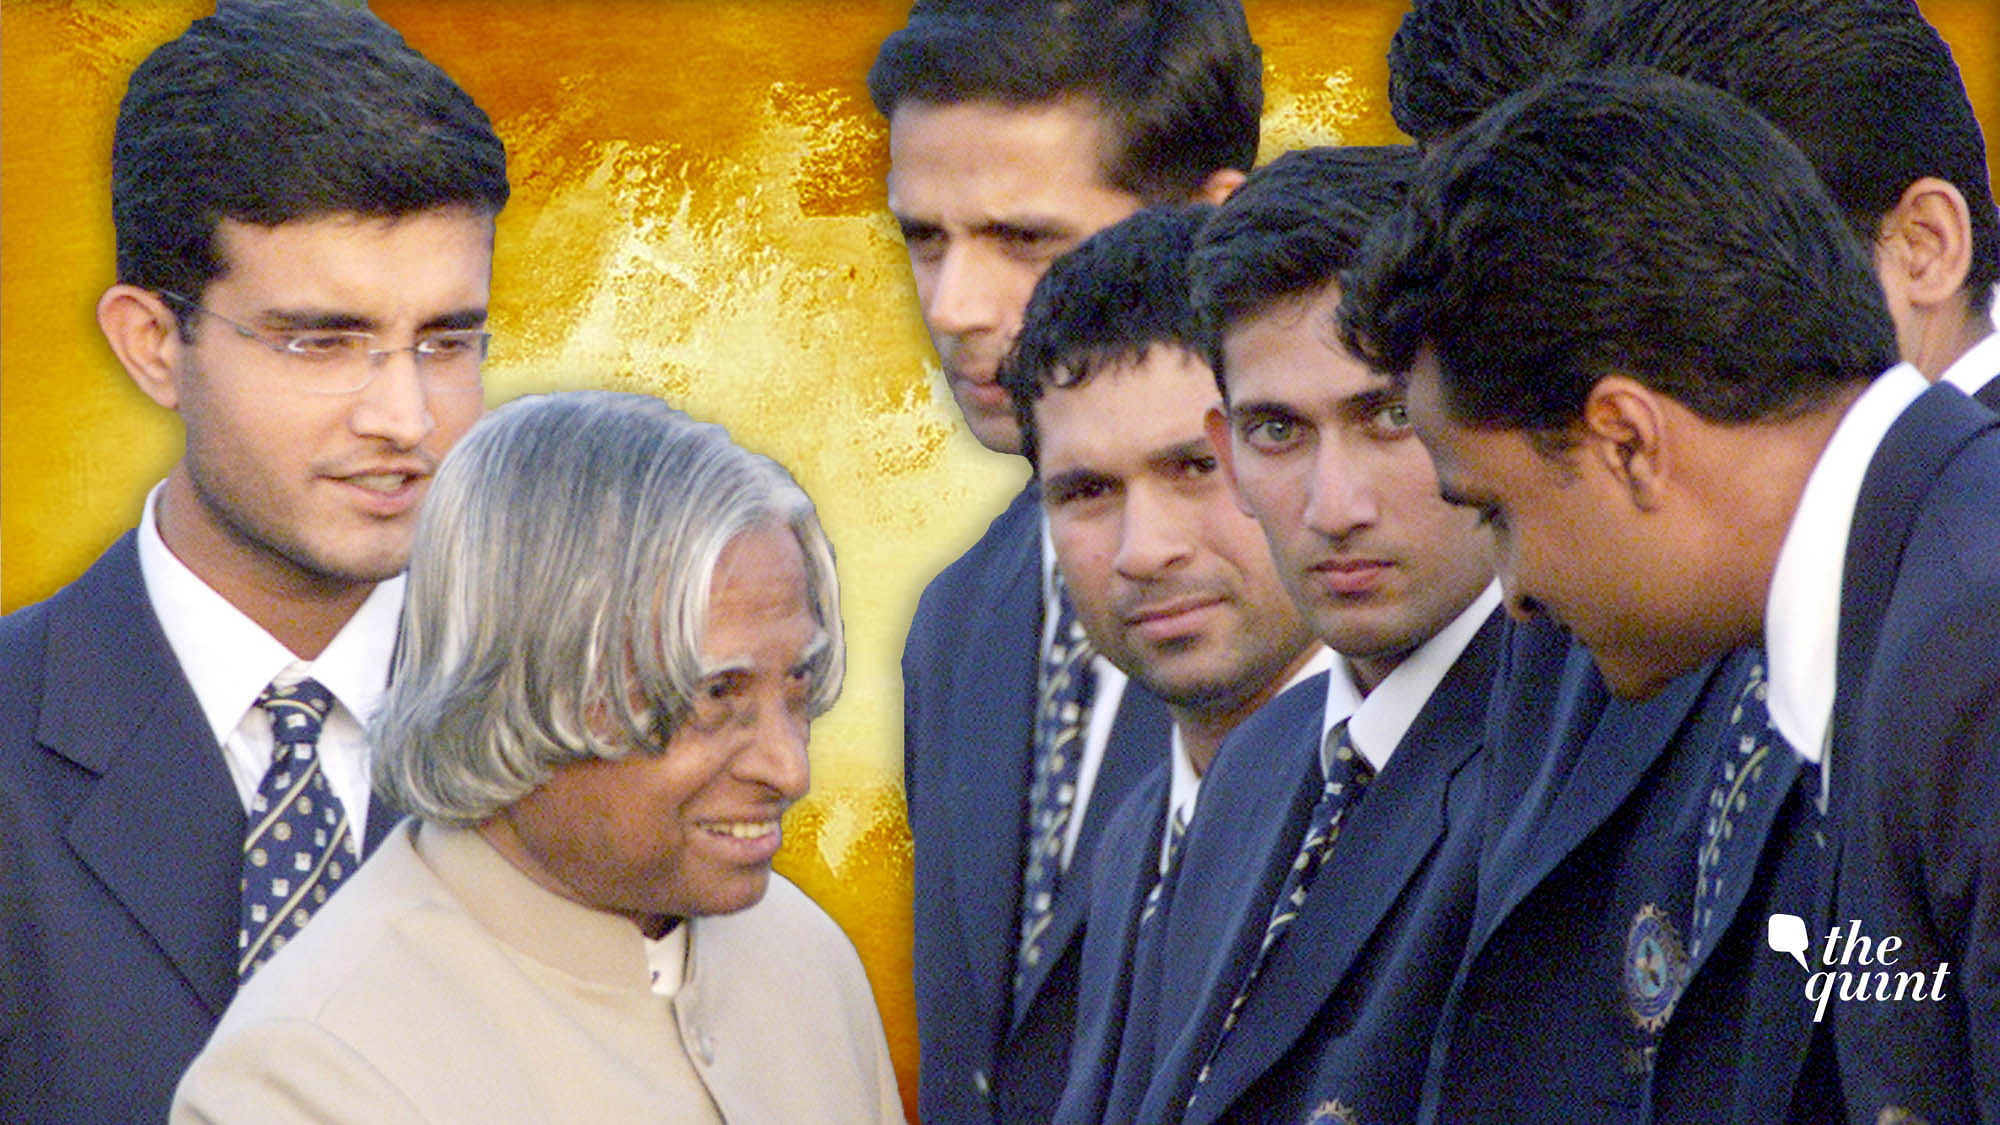 After they lost to Australia in the 2003 WC final, President Kalam had hosted the Indian team at Rashtrapati Bhavan.